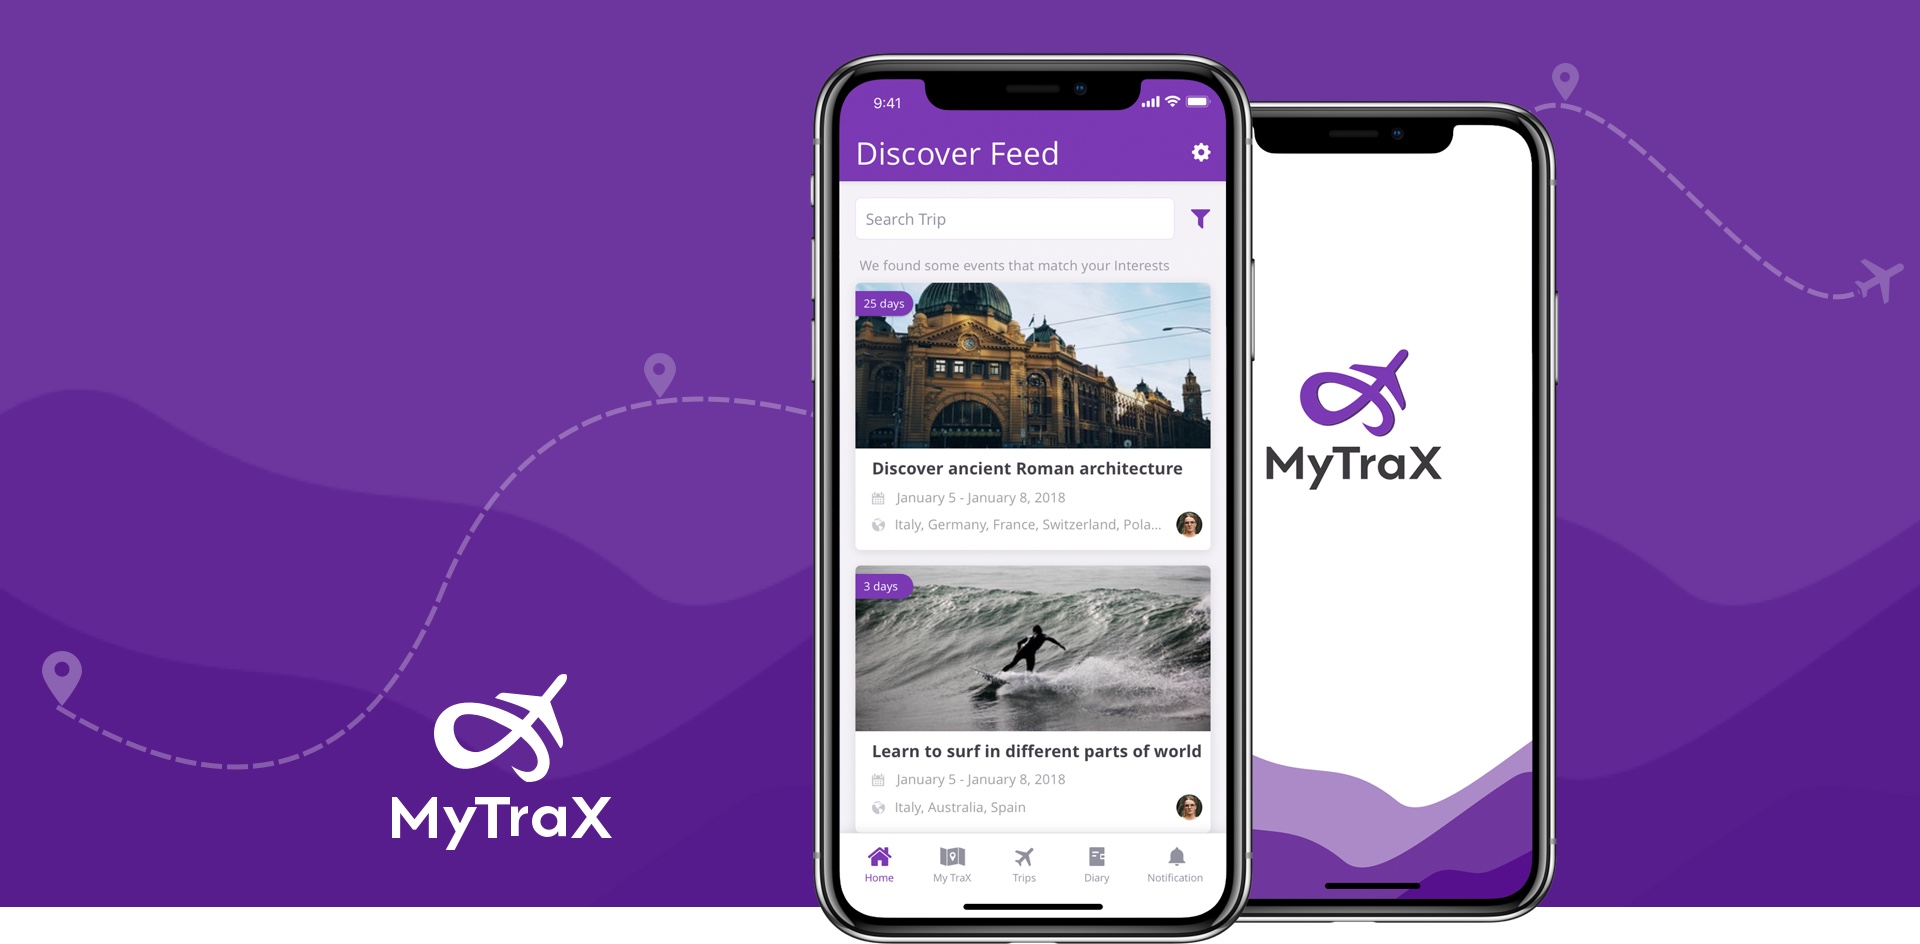 Discover Feed of MyTrax App